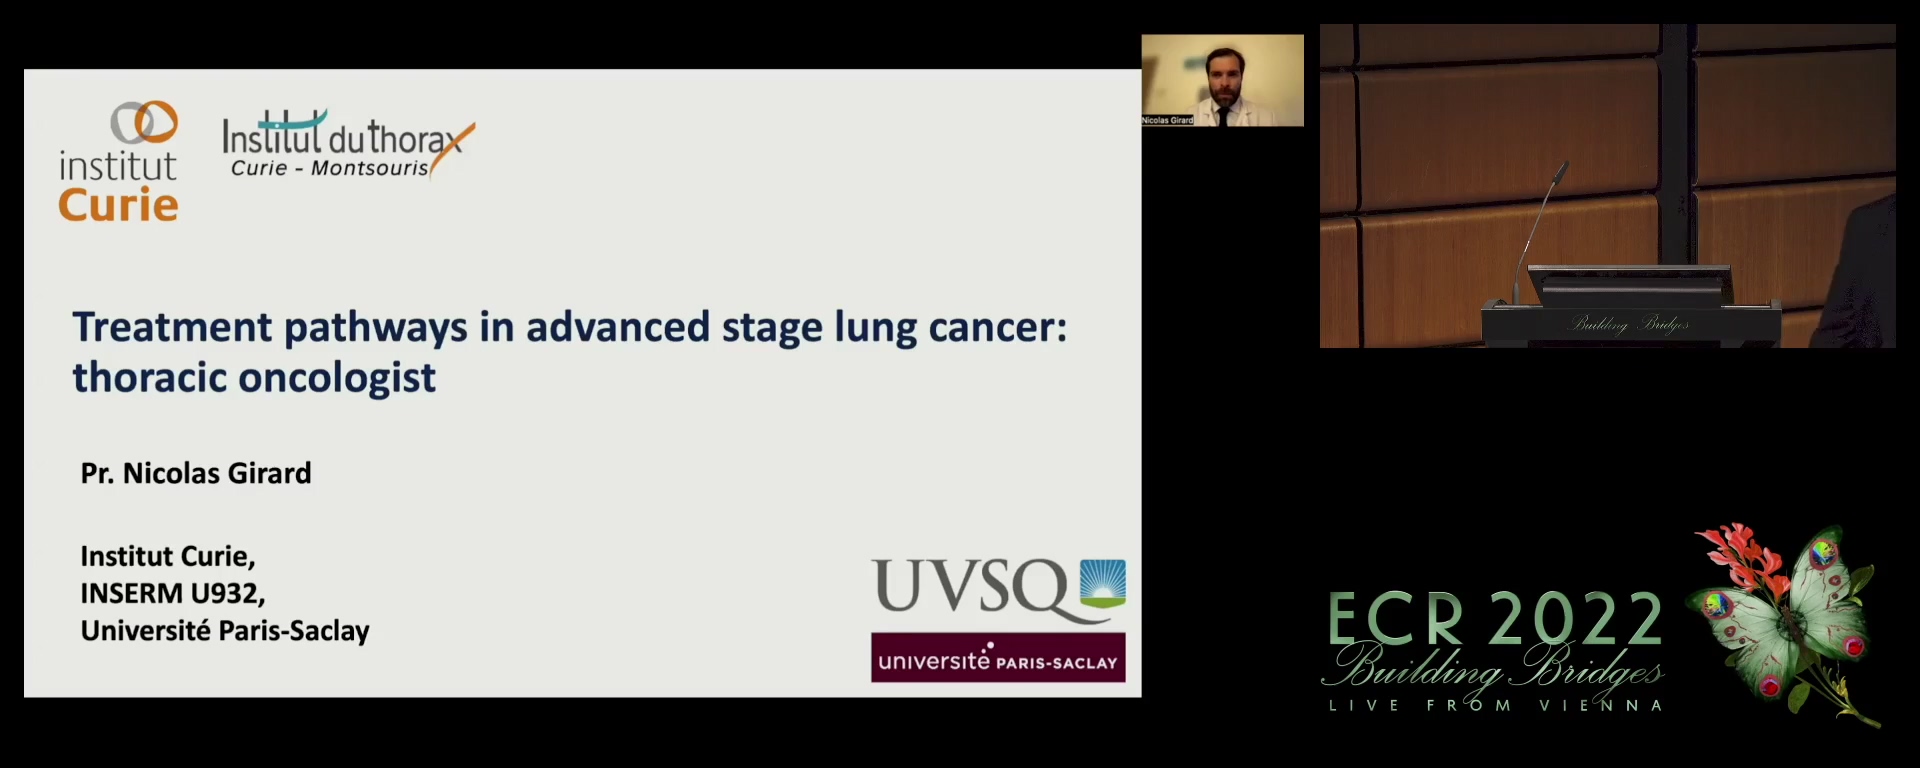 Treatment pathways in advanced stage lung cancer: thoracic oncologist - Nicolas Girard, Paris / FR